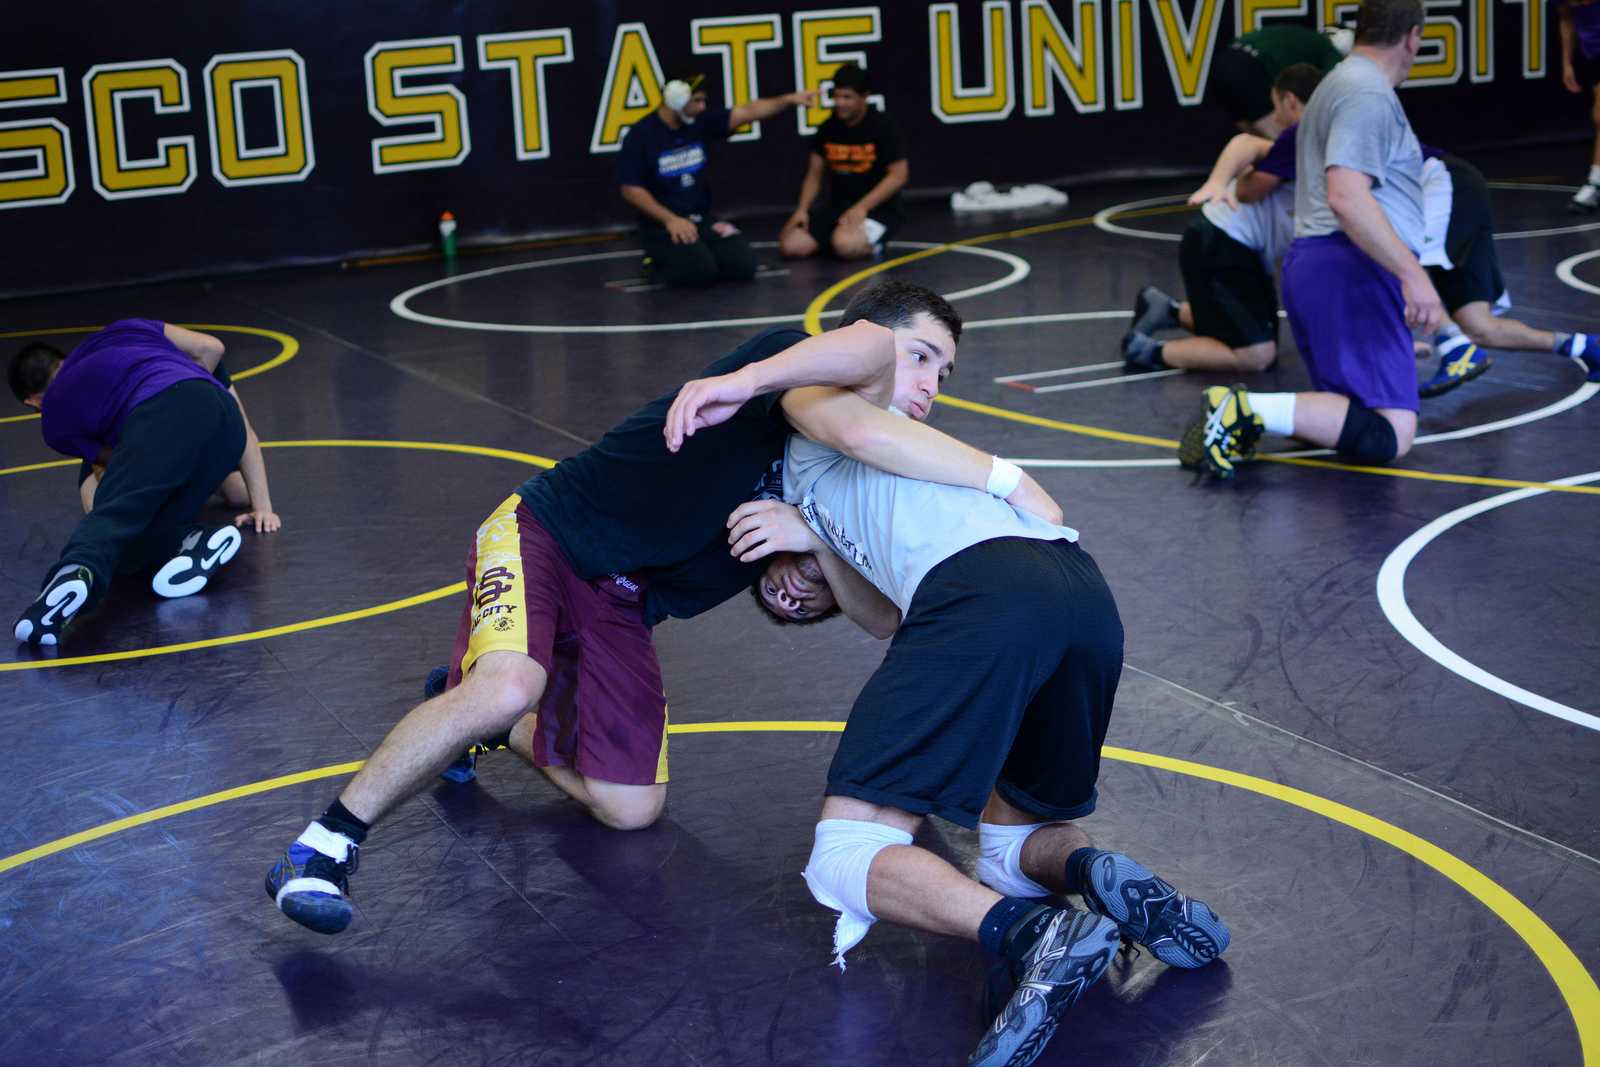 Senior Isaiah Hurtado (left), wrestles with senior Alex Williams (right), during practice at SF State on Friday, Oct. 11, 2013. Photo by Philip Houston / Xpress